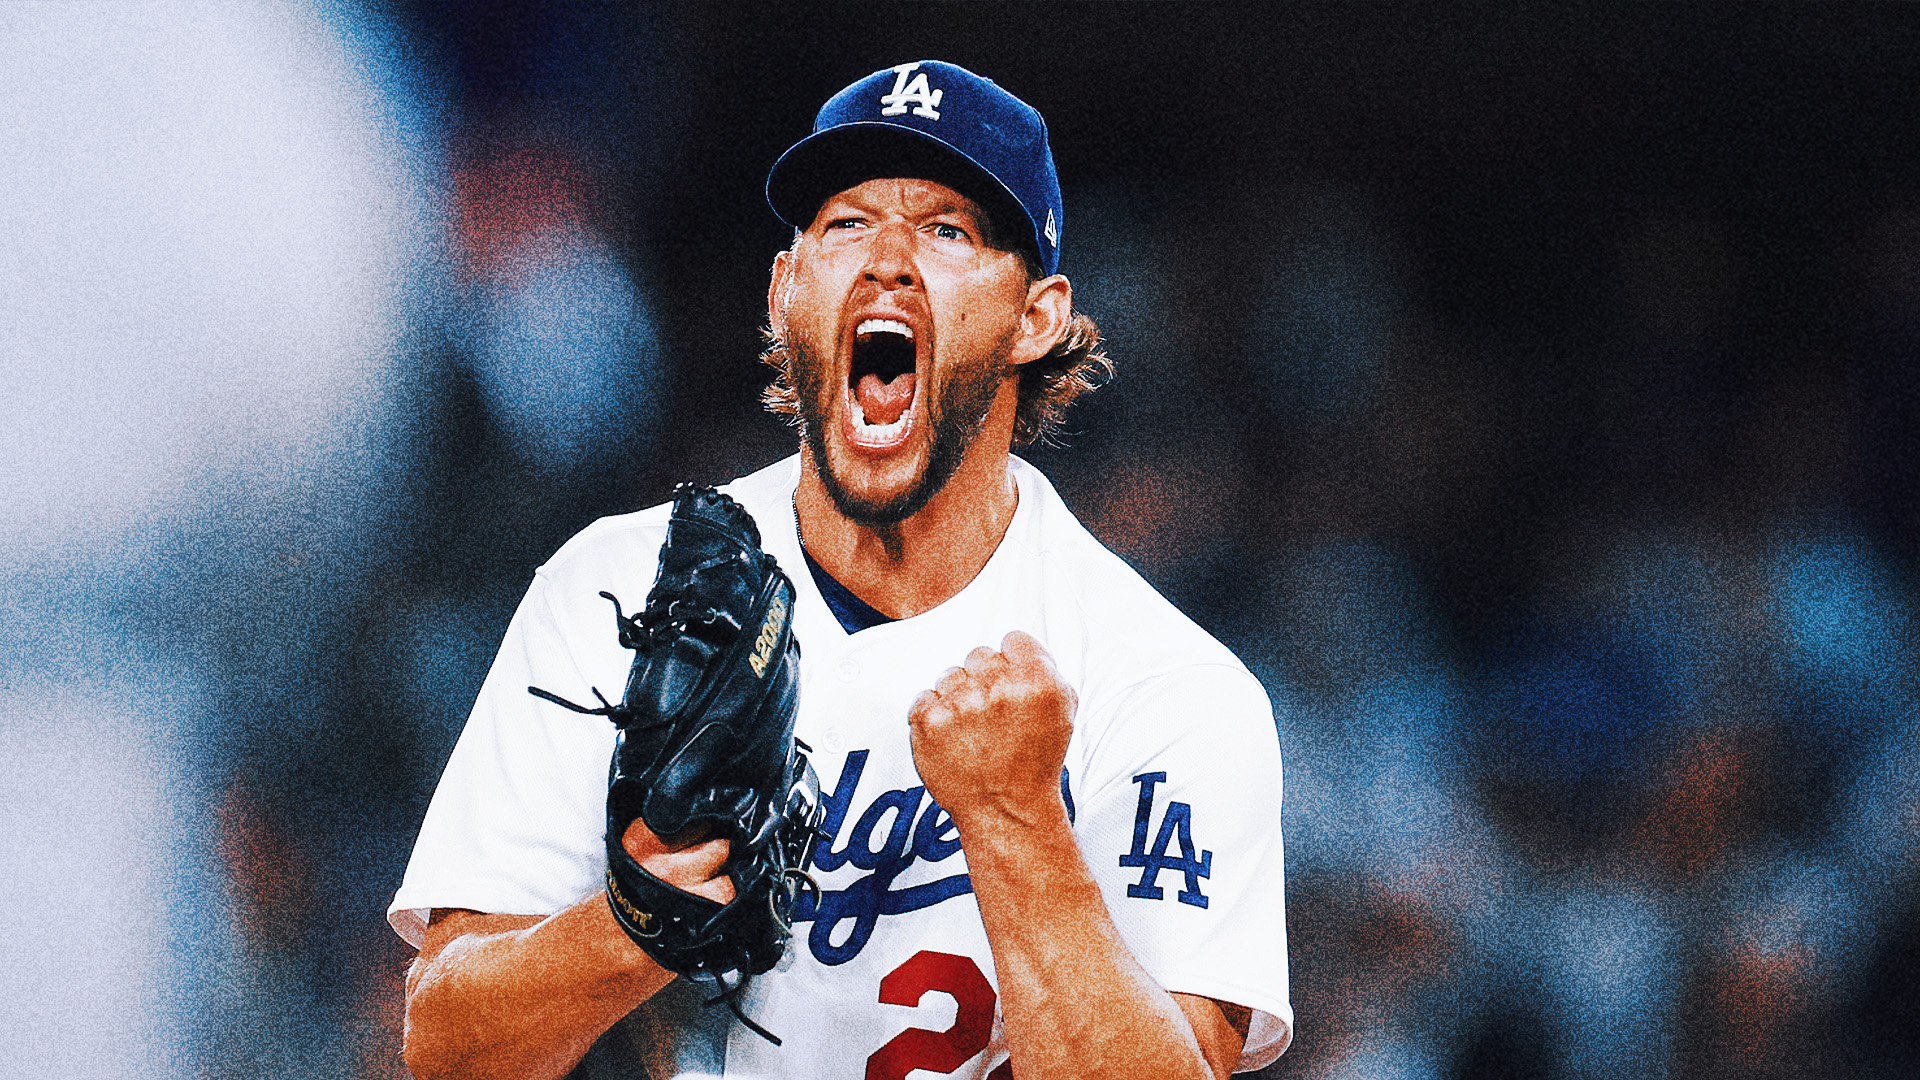 Clayton Kershaw’s 200th win ‘epitomized who he is as a competitor’